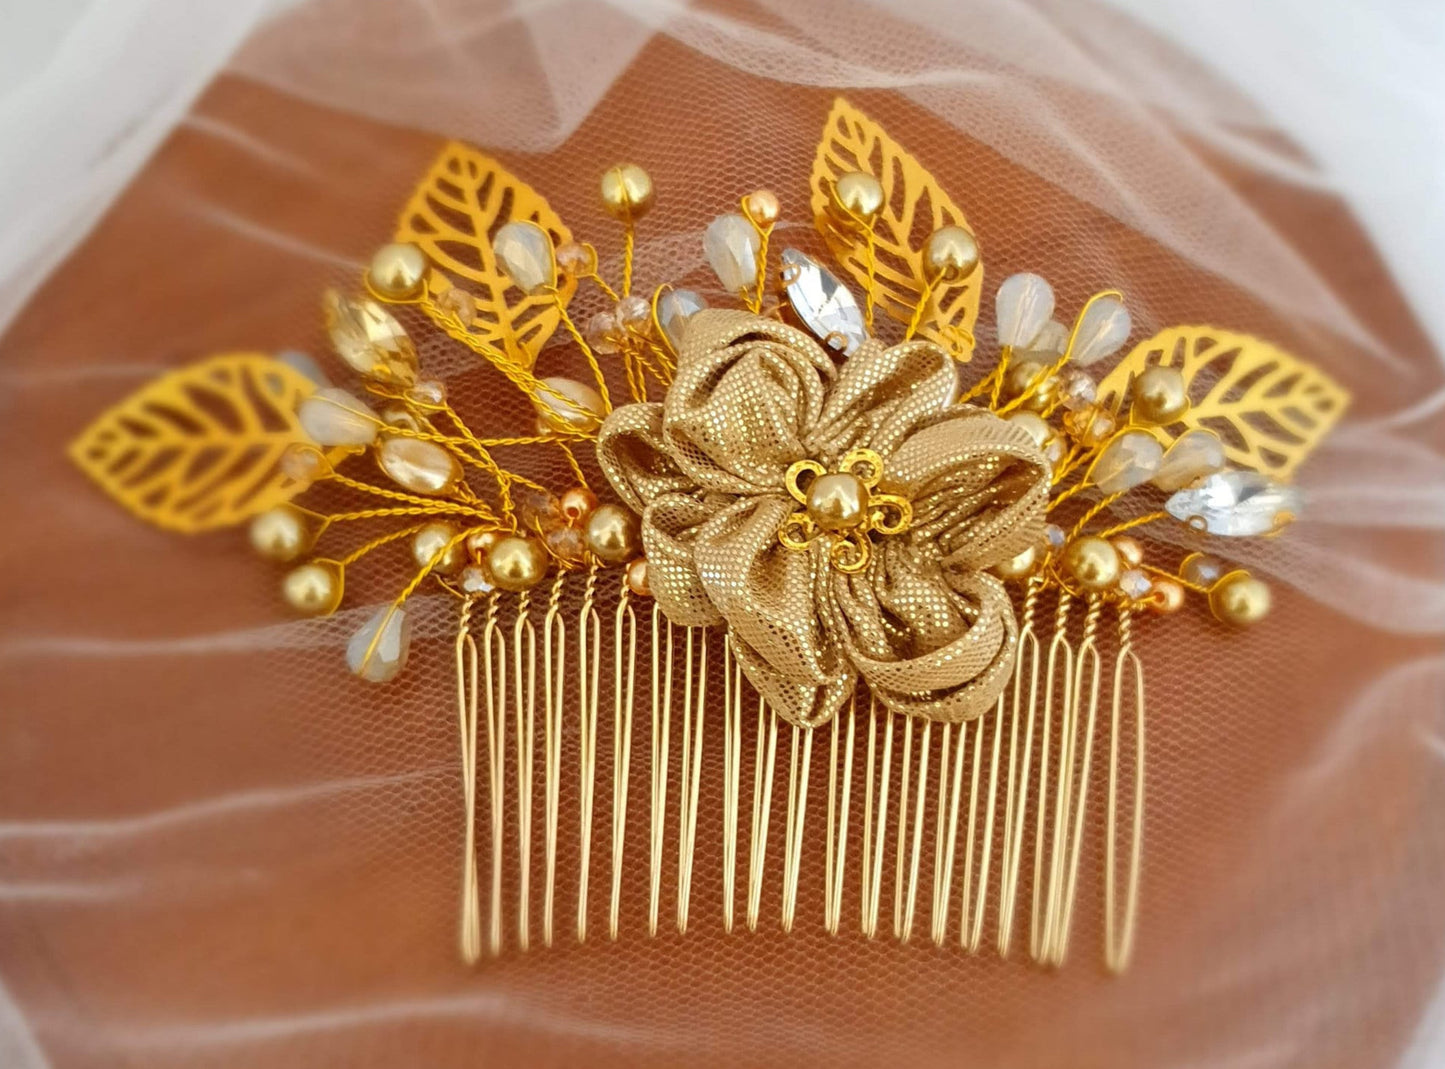 Handmade Bridal Comb with Pearls and Dropstones - Elegant Hair Accessory for Weddings, Guests and Parties, Gold-Tone Metal Comb